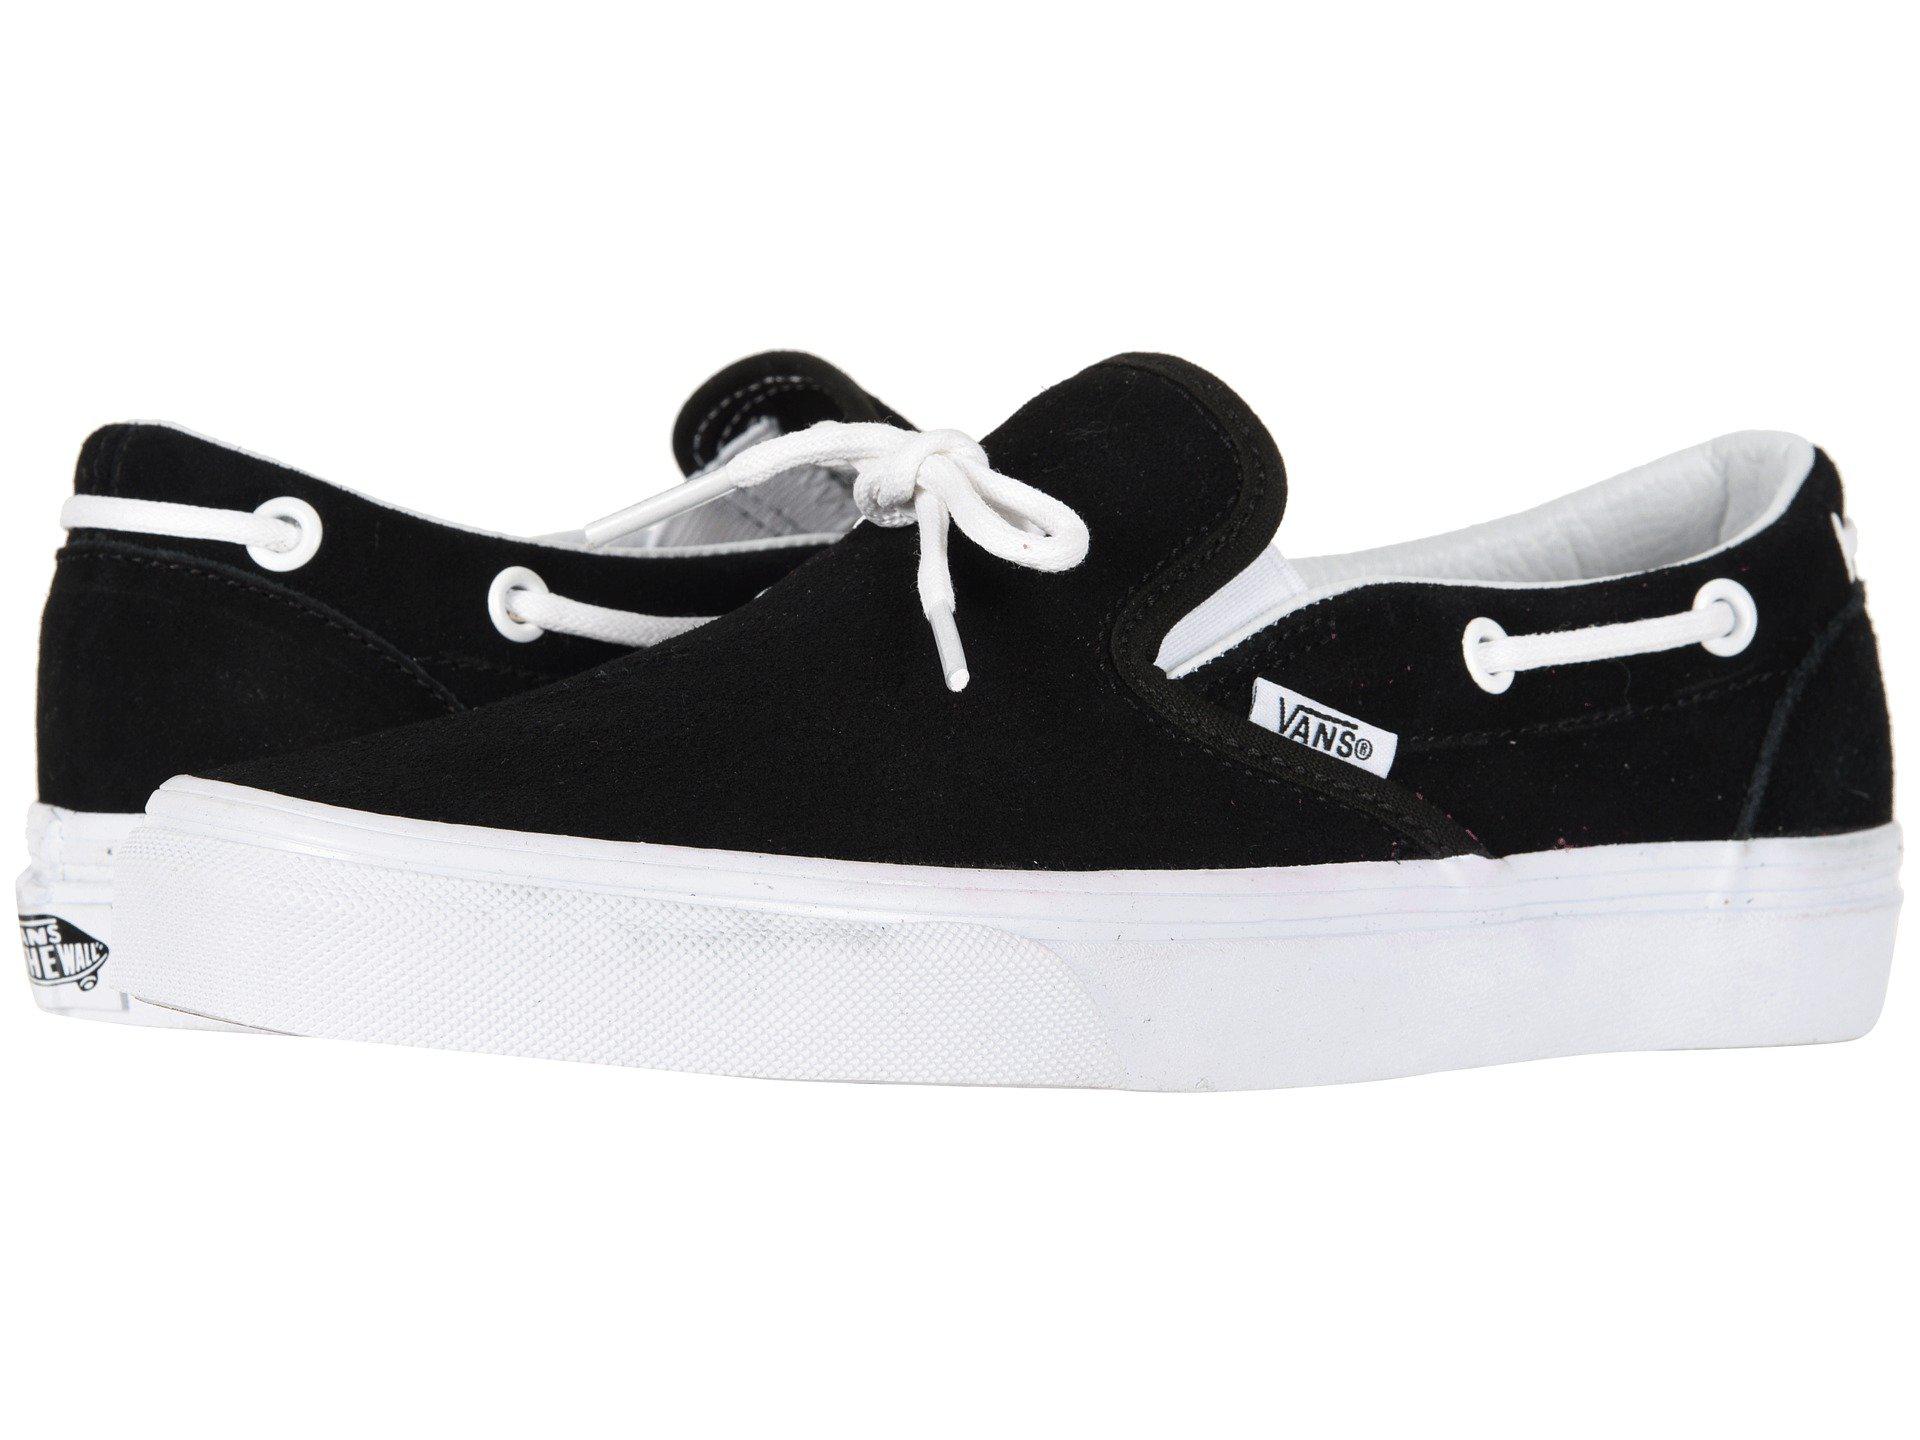 Lacey 72 ((suede) Leather Lace/black) Skate Shoes for -